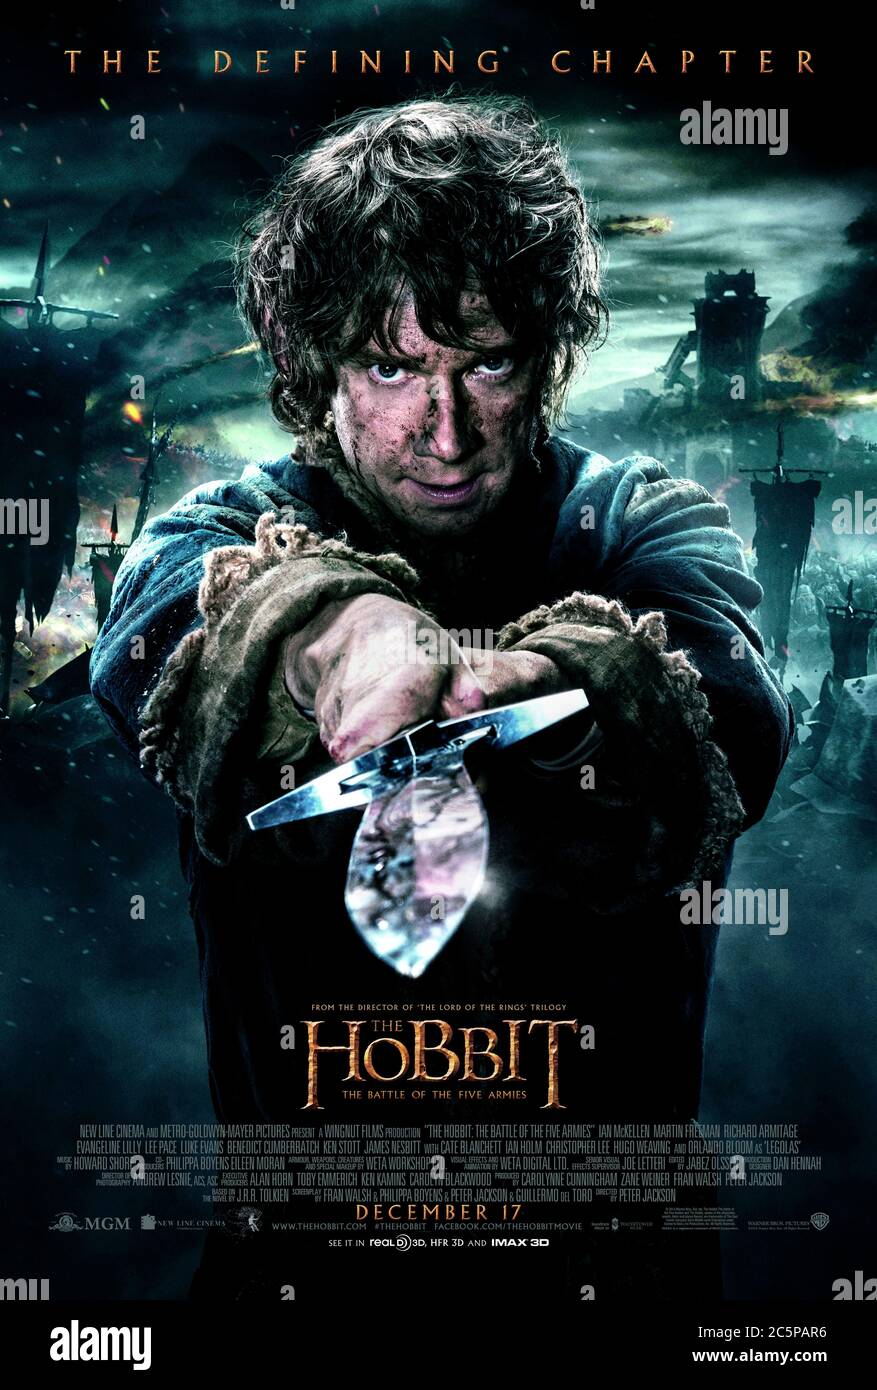 The Hobbit: The Battle of the Five Armies (2014) directed by Peter Jackson and starring Ian McKellen, Martin Freeman, Richard Armitage and James Nesbitt. Final part of the trilogy based on J. R. R. Tolkien's book The Hobbit, Bilbo Baggins fight to keep the Lonely Mountain from falling into the hands of the mysterious Necromancer. US one sheet poster ***EDITORIAL USE ONLY***. Credit: BFA / Warner Bros Stock Photo